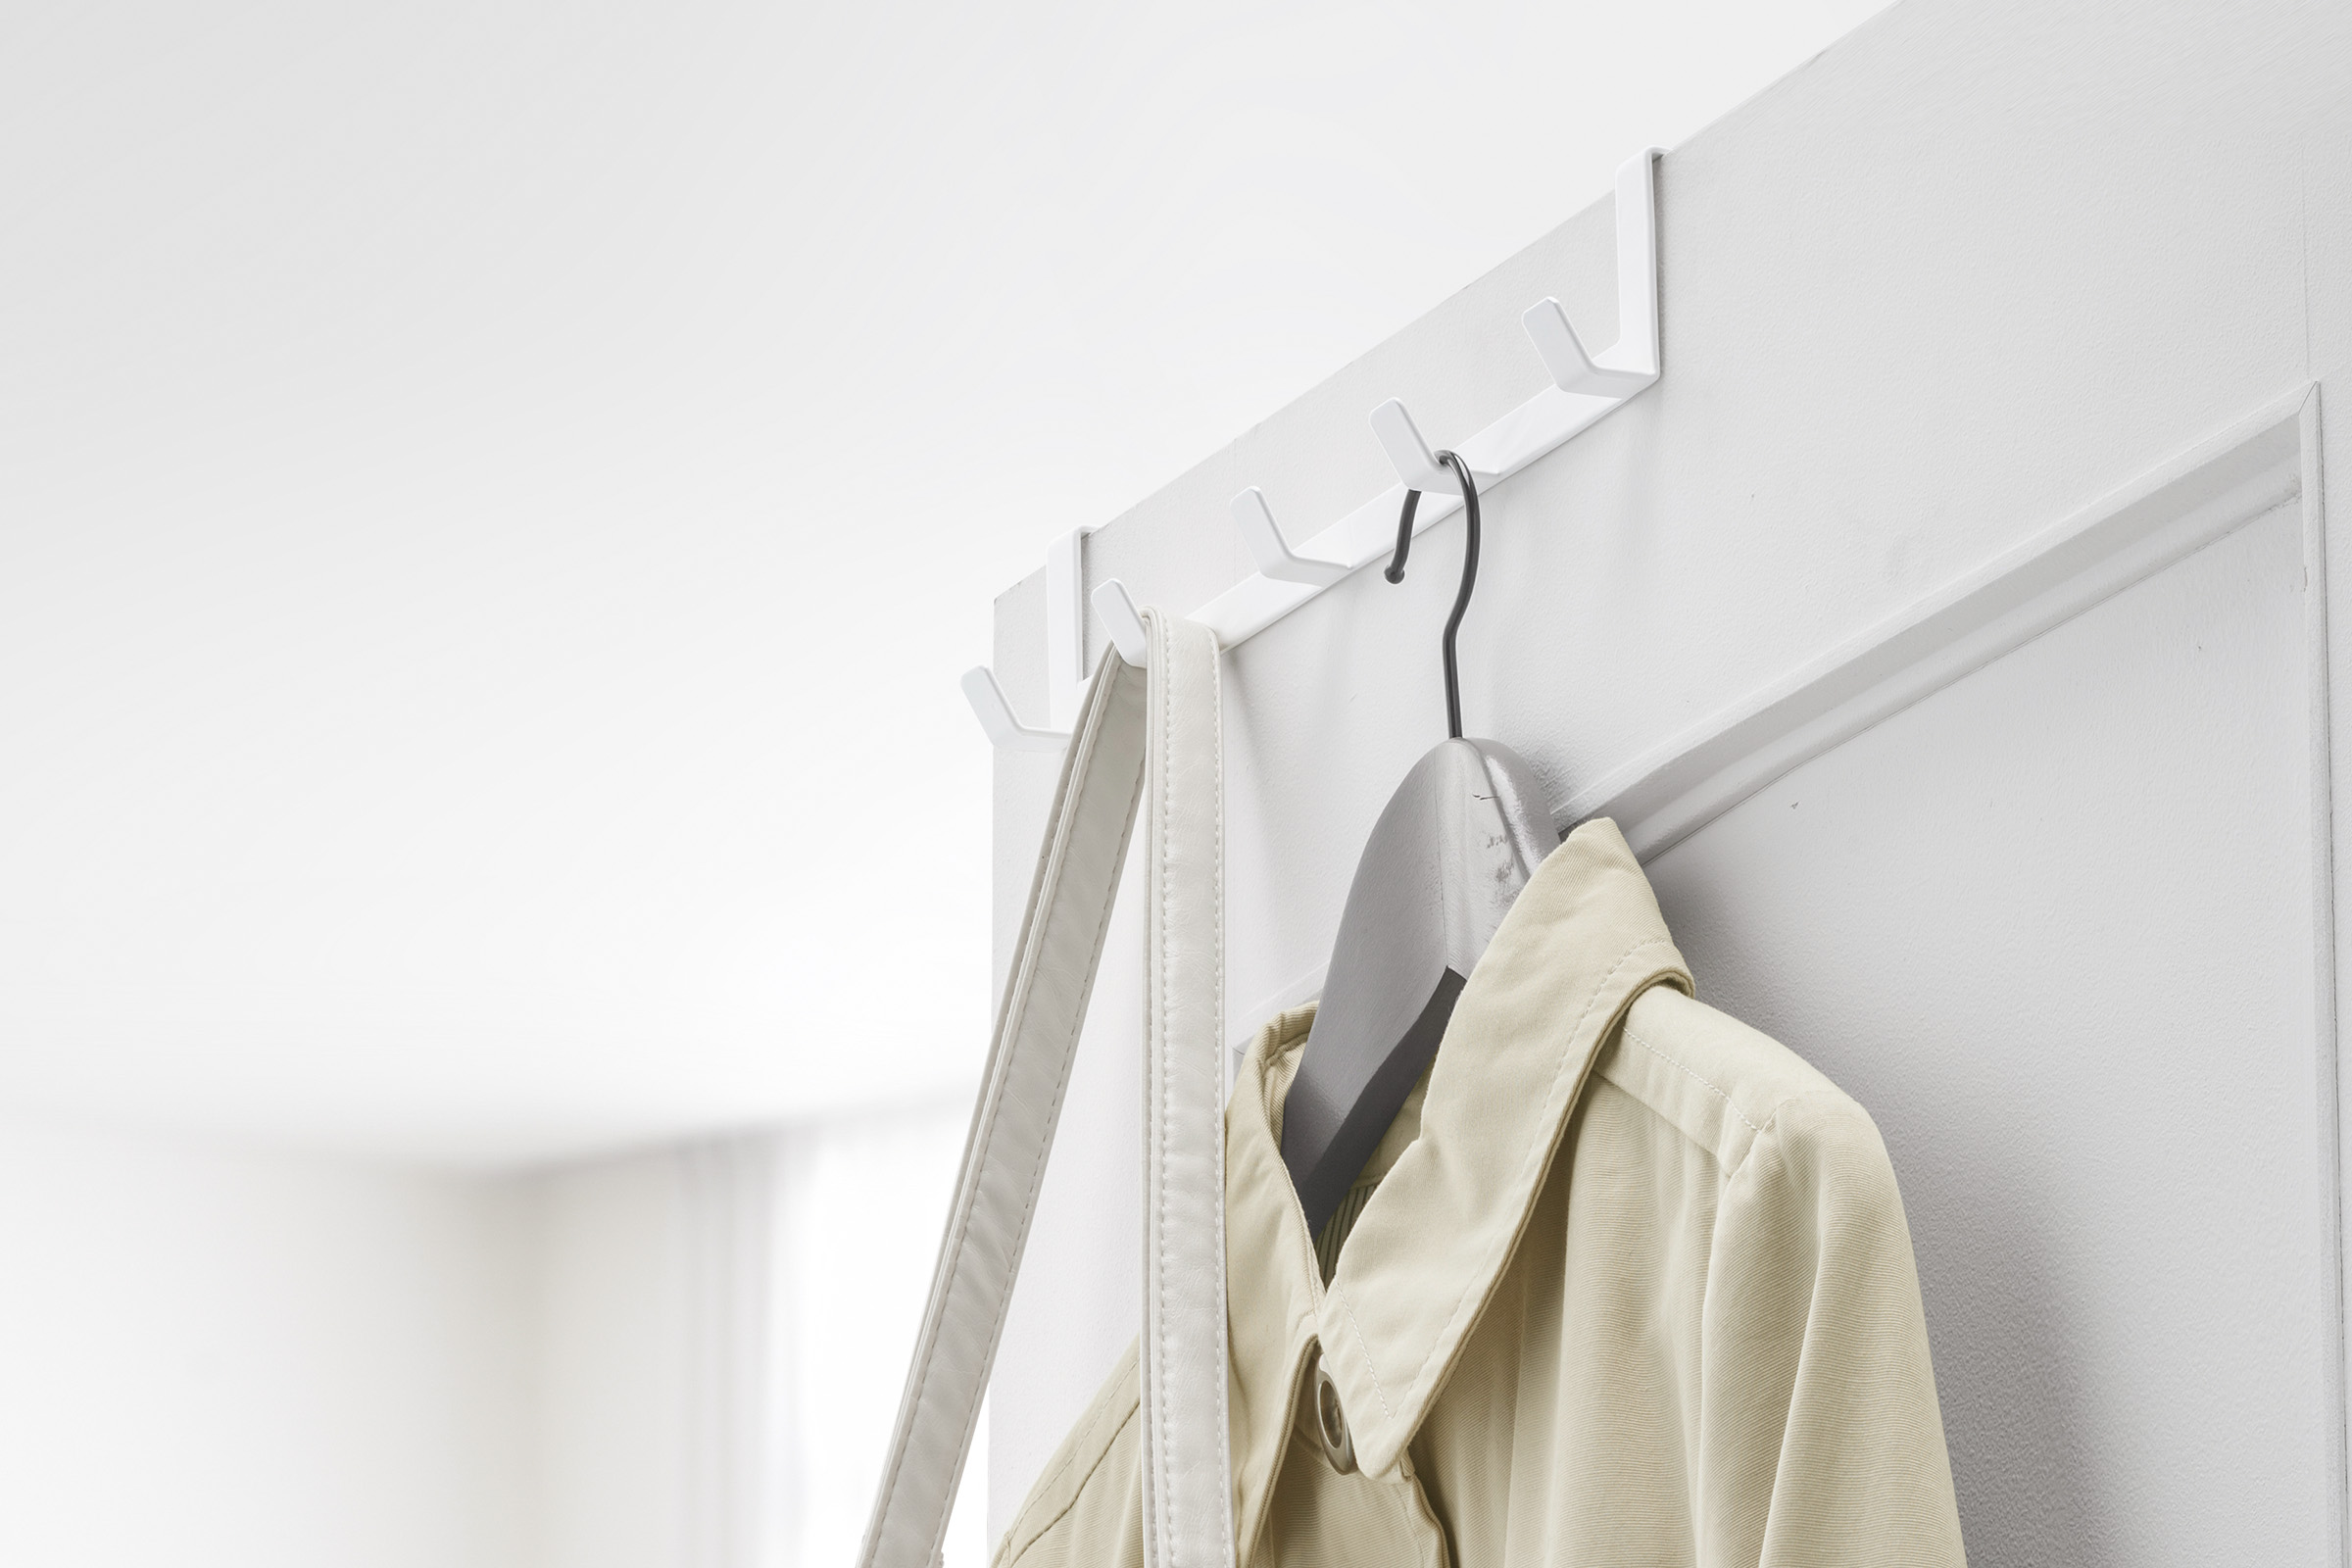 White Yamazaki Over-the-Door Hanger with a jacket and bag hung up